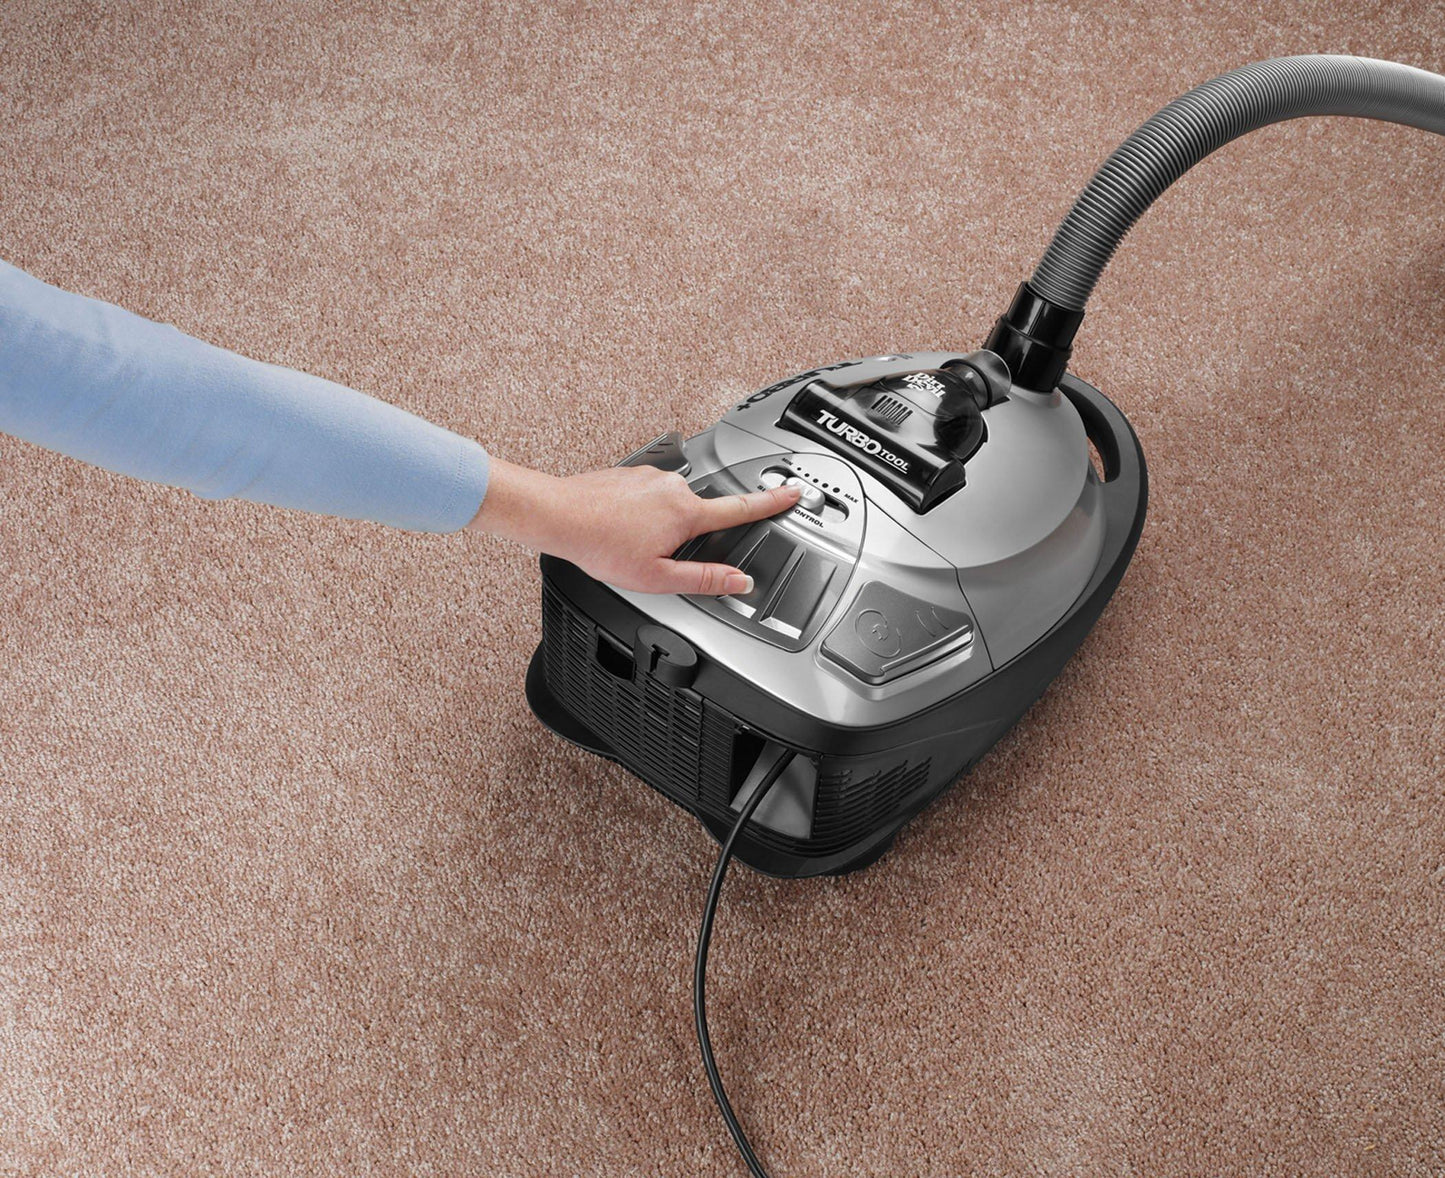 Turbo Plus Bagged Canister Vacuum